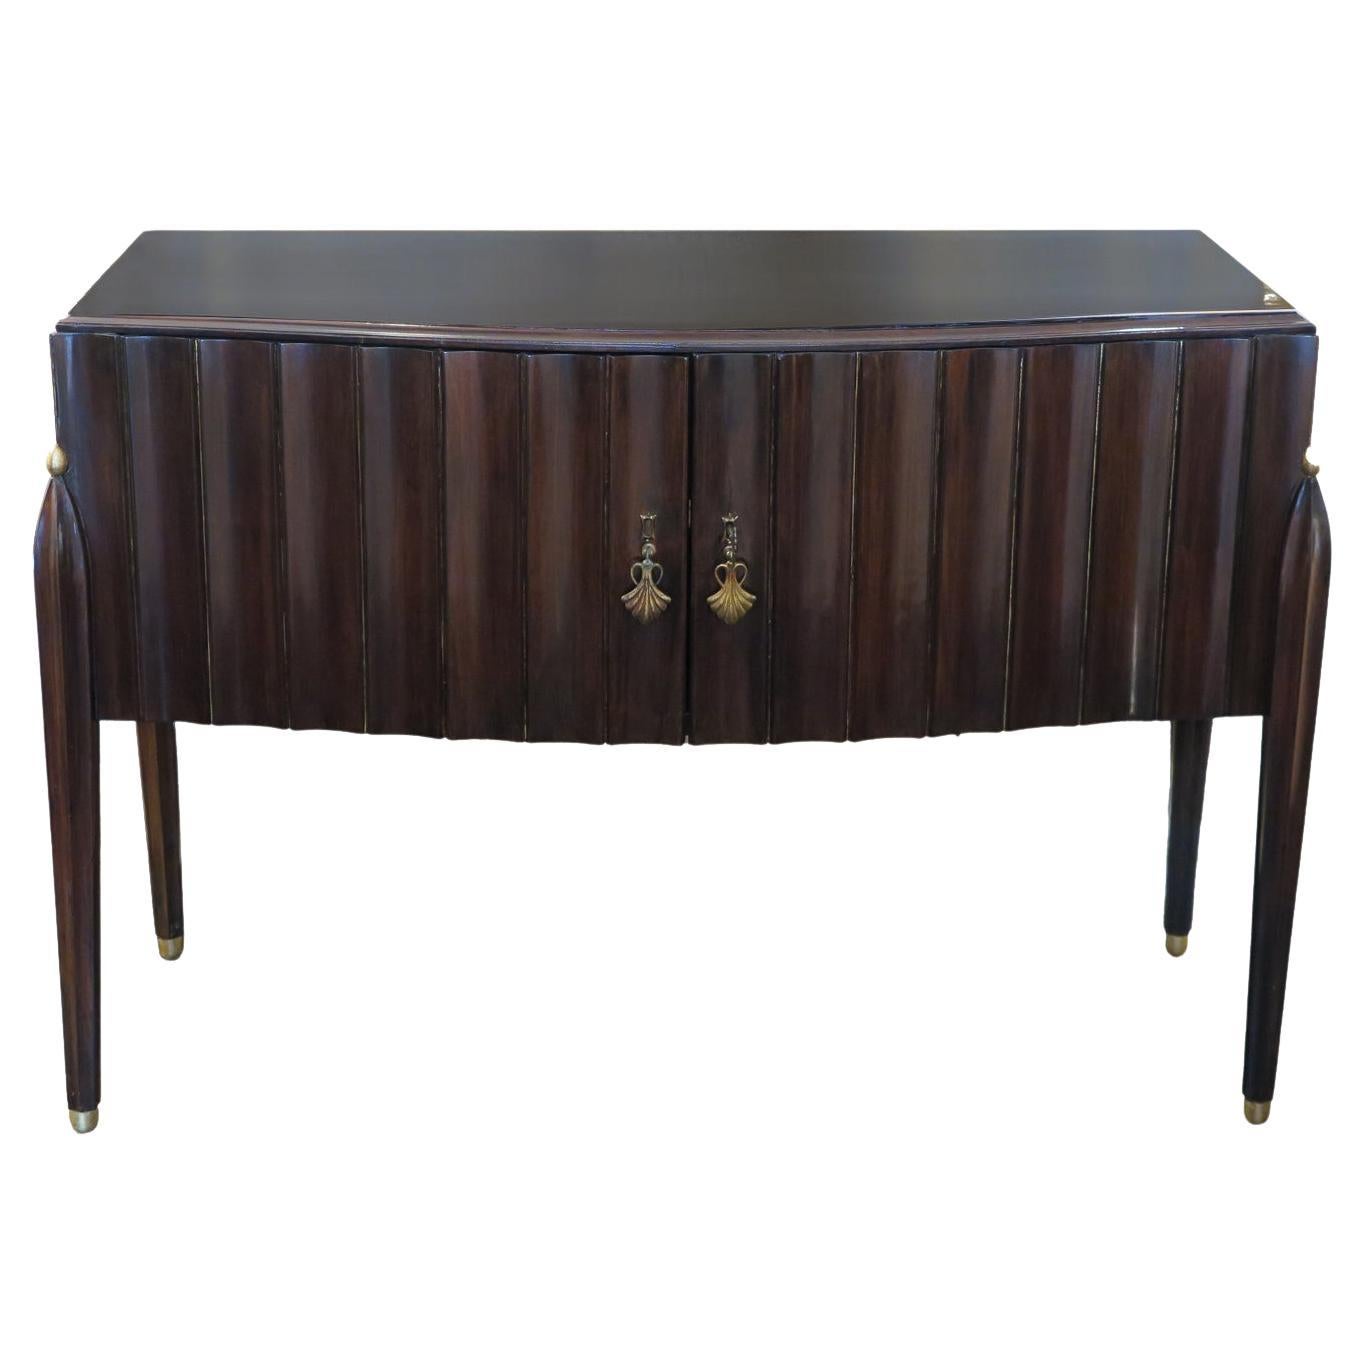 Fluted Console Cabinet in Dark Stained Mahogany, Italy, circa 1940s